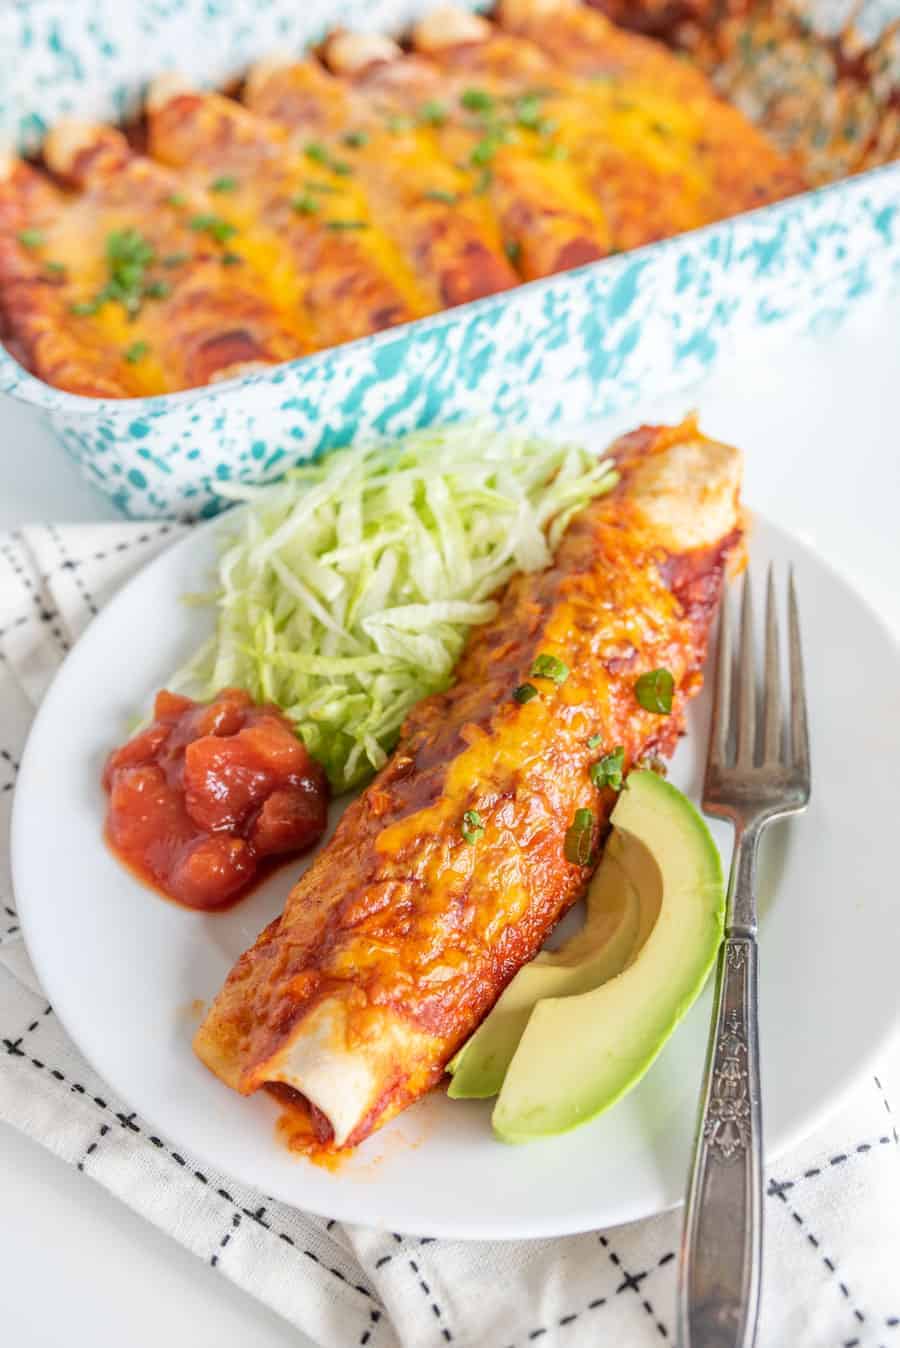 Turn up the fun on dinner time with these cheesy and flavorful Ground Beef Enchiladas. With simple ingredients and a whole lot of flavor, they could be your newest weeknight staple.